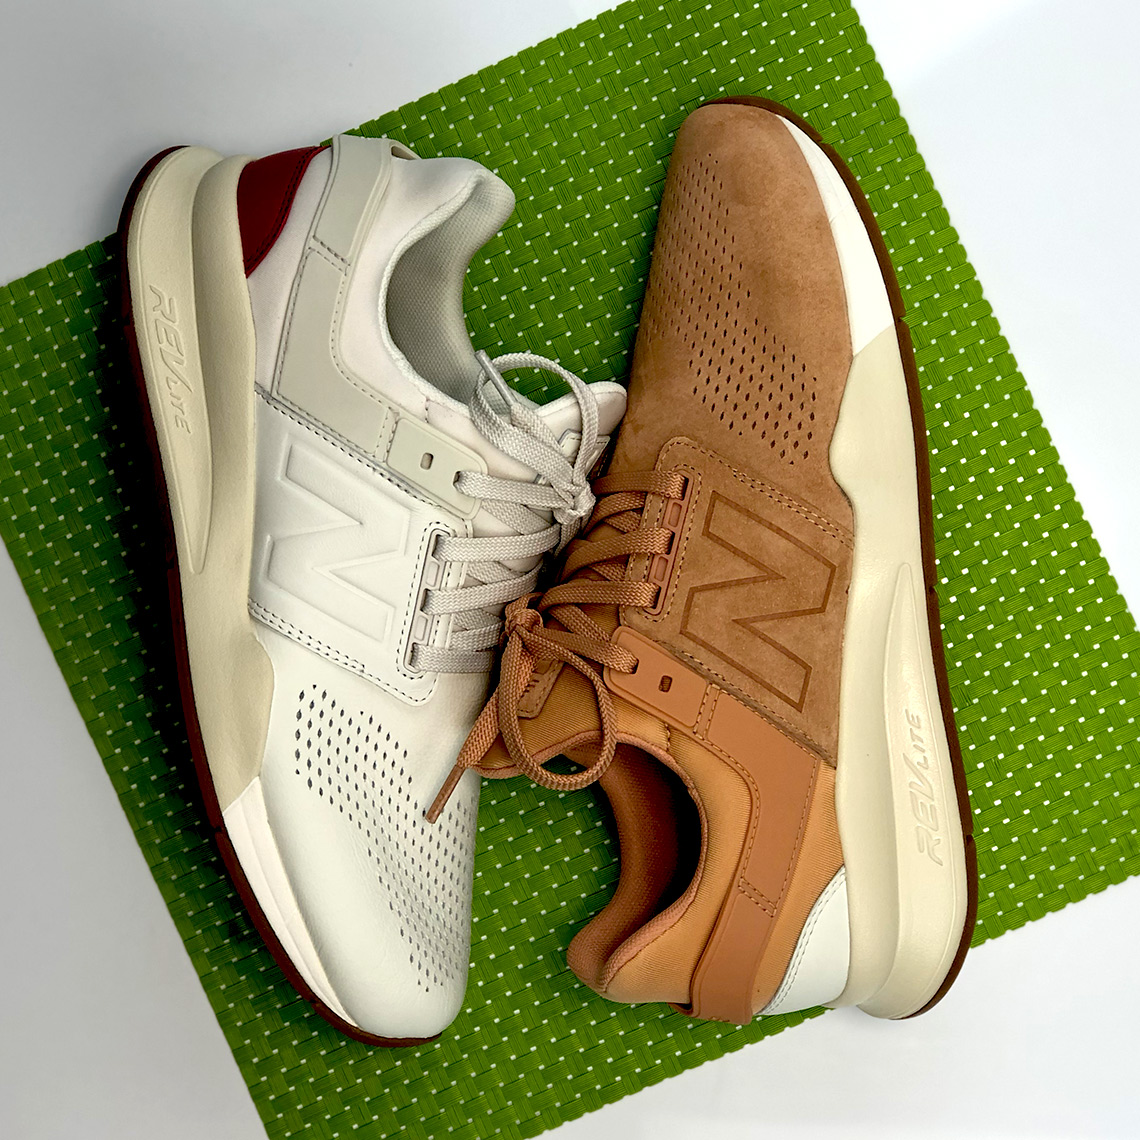 gap Definitive time table New Balance 247 v2 Suede Leather Available Now | SneakerNews.com